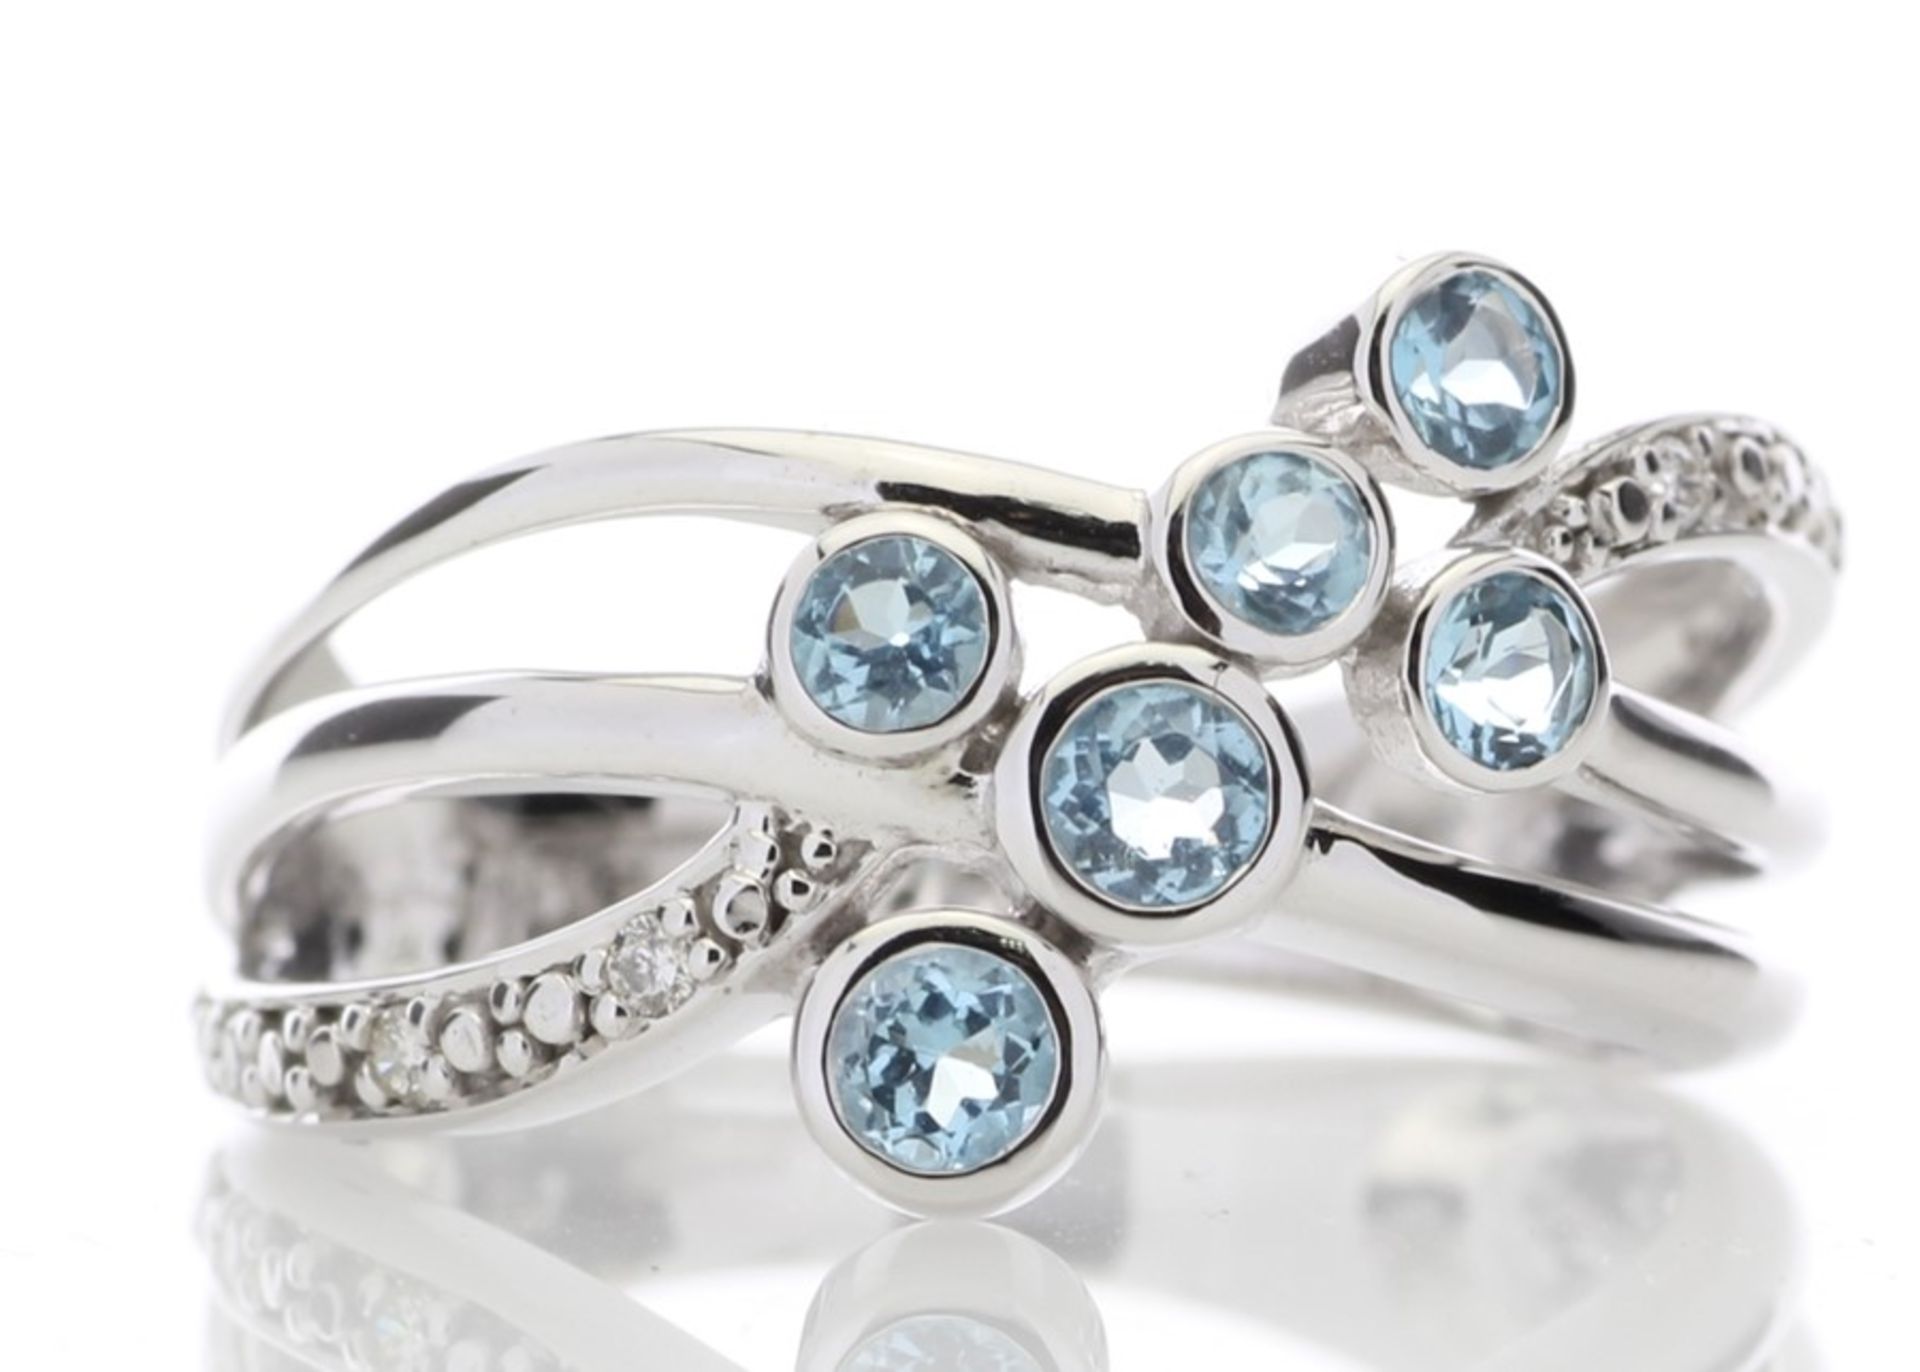 Valued by GIE £905.00 - 9ct White Gold Fancy Cluster Diamond Blue Topaz Ring 0.10 Carats - 8180046L, - Image 4 of 6